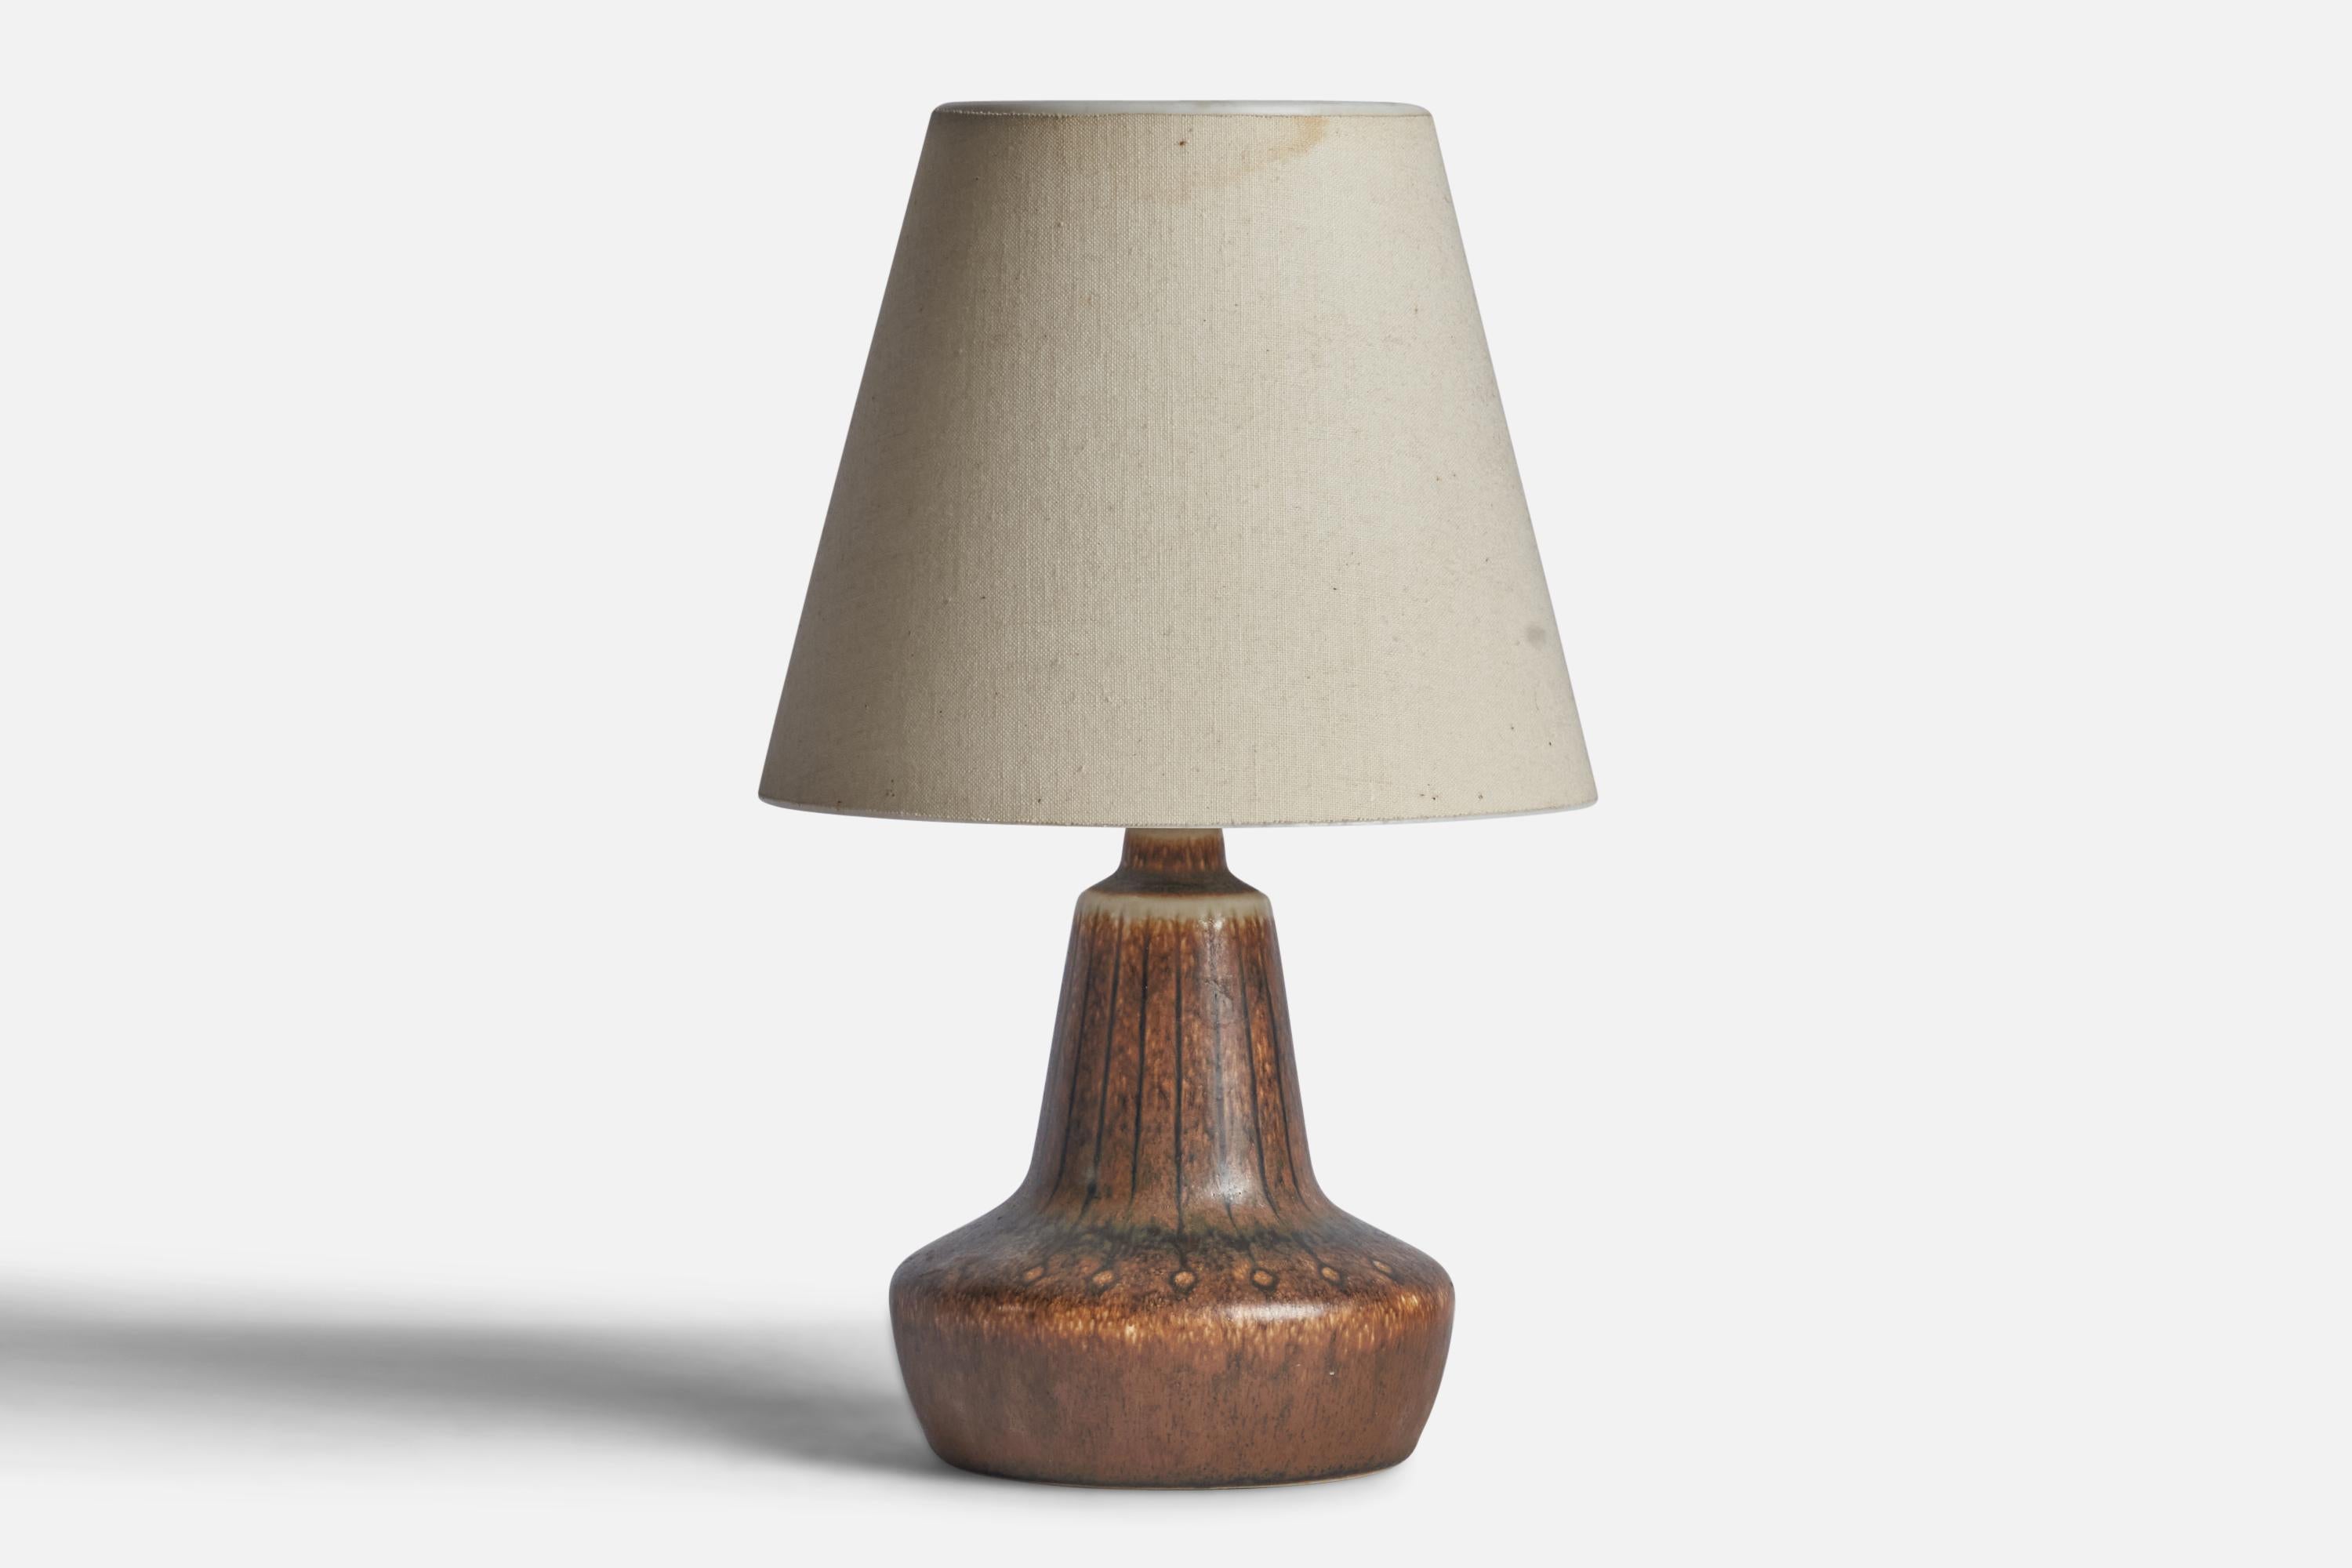 A brown-glazed incised stoneware table lamp designed by Gunnar Nylund and produced by Rörstrand, Sweden, c. 1940s.

“SWEDEN 669” stamp on bottom
Dimensions of Lamp (inches): 7.25” H x 4.5” Diameter
Dimensions of Shade (inches): 3.5” Top Diameter x